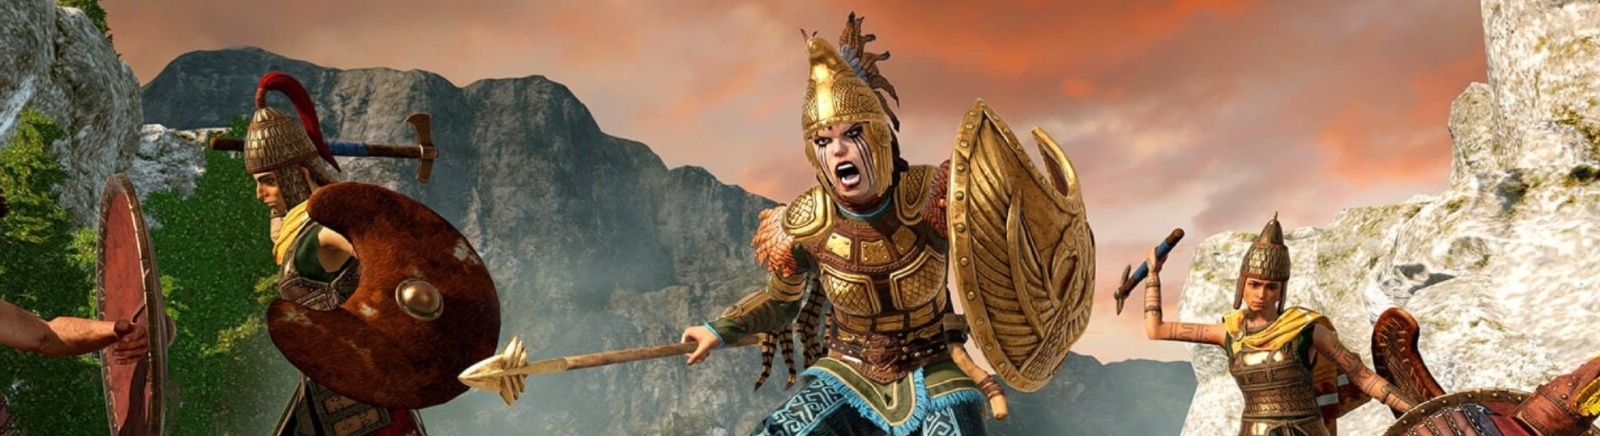 download free total war troy amazons